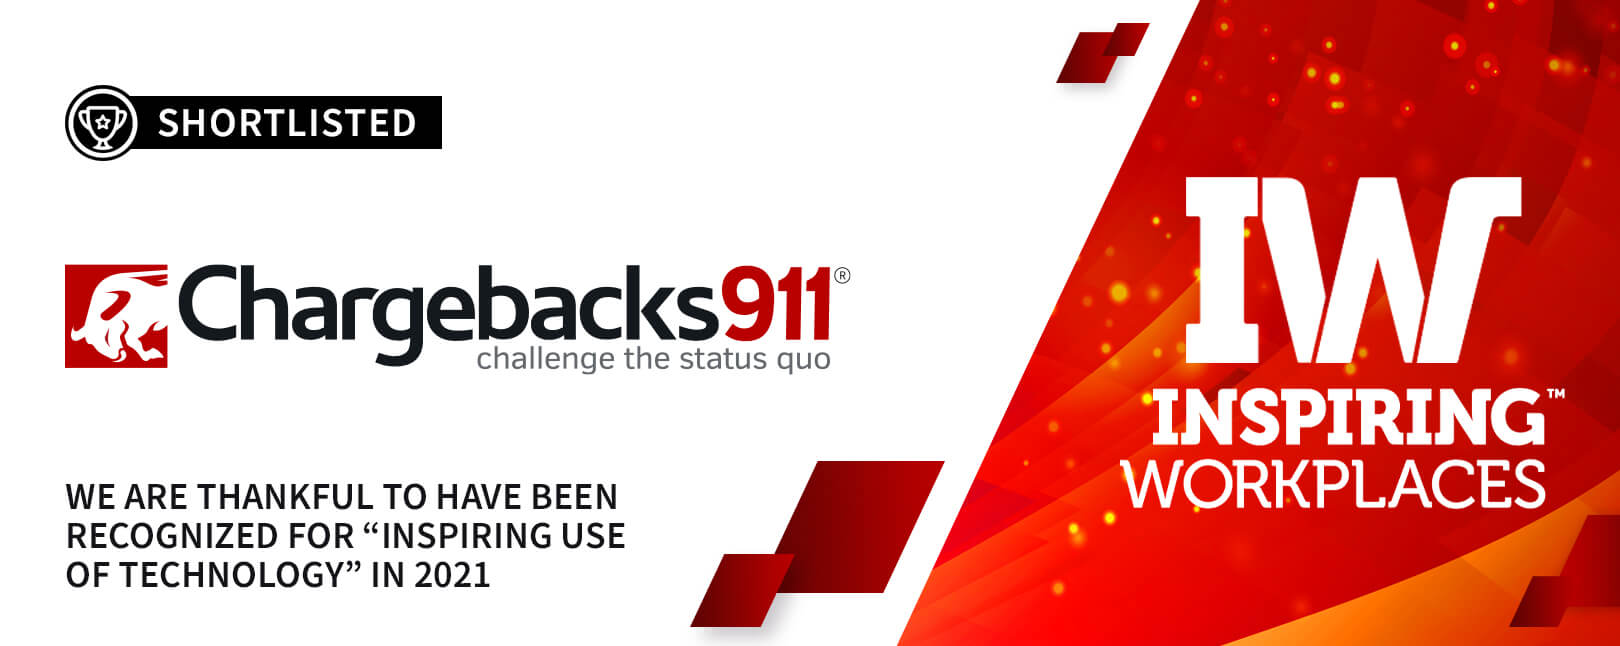 Chargebacks911® Recognized for “Inspiring Use of Technology” in 2021!